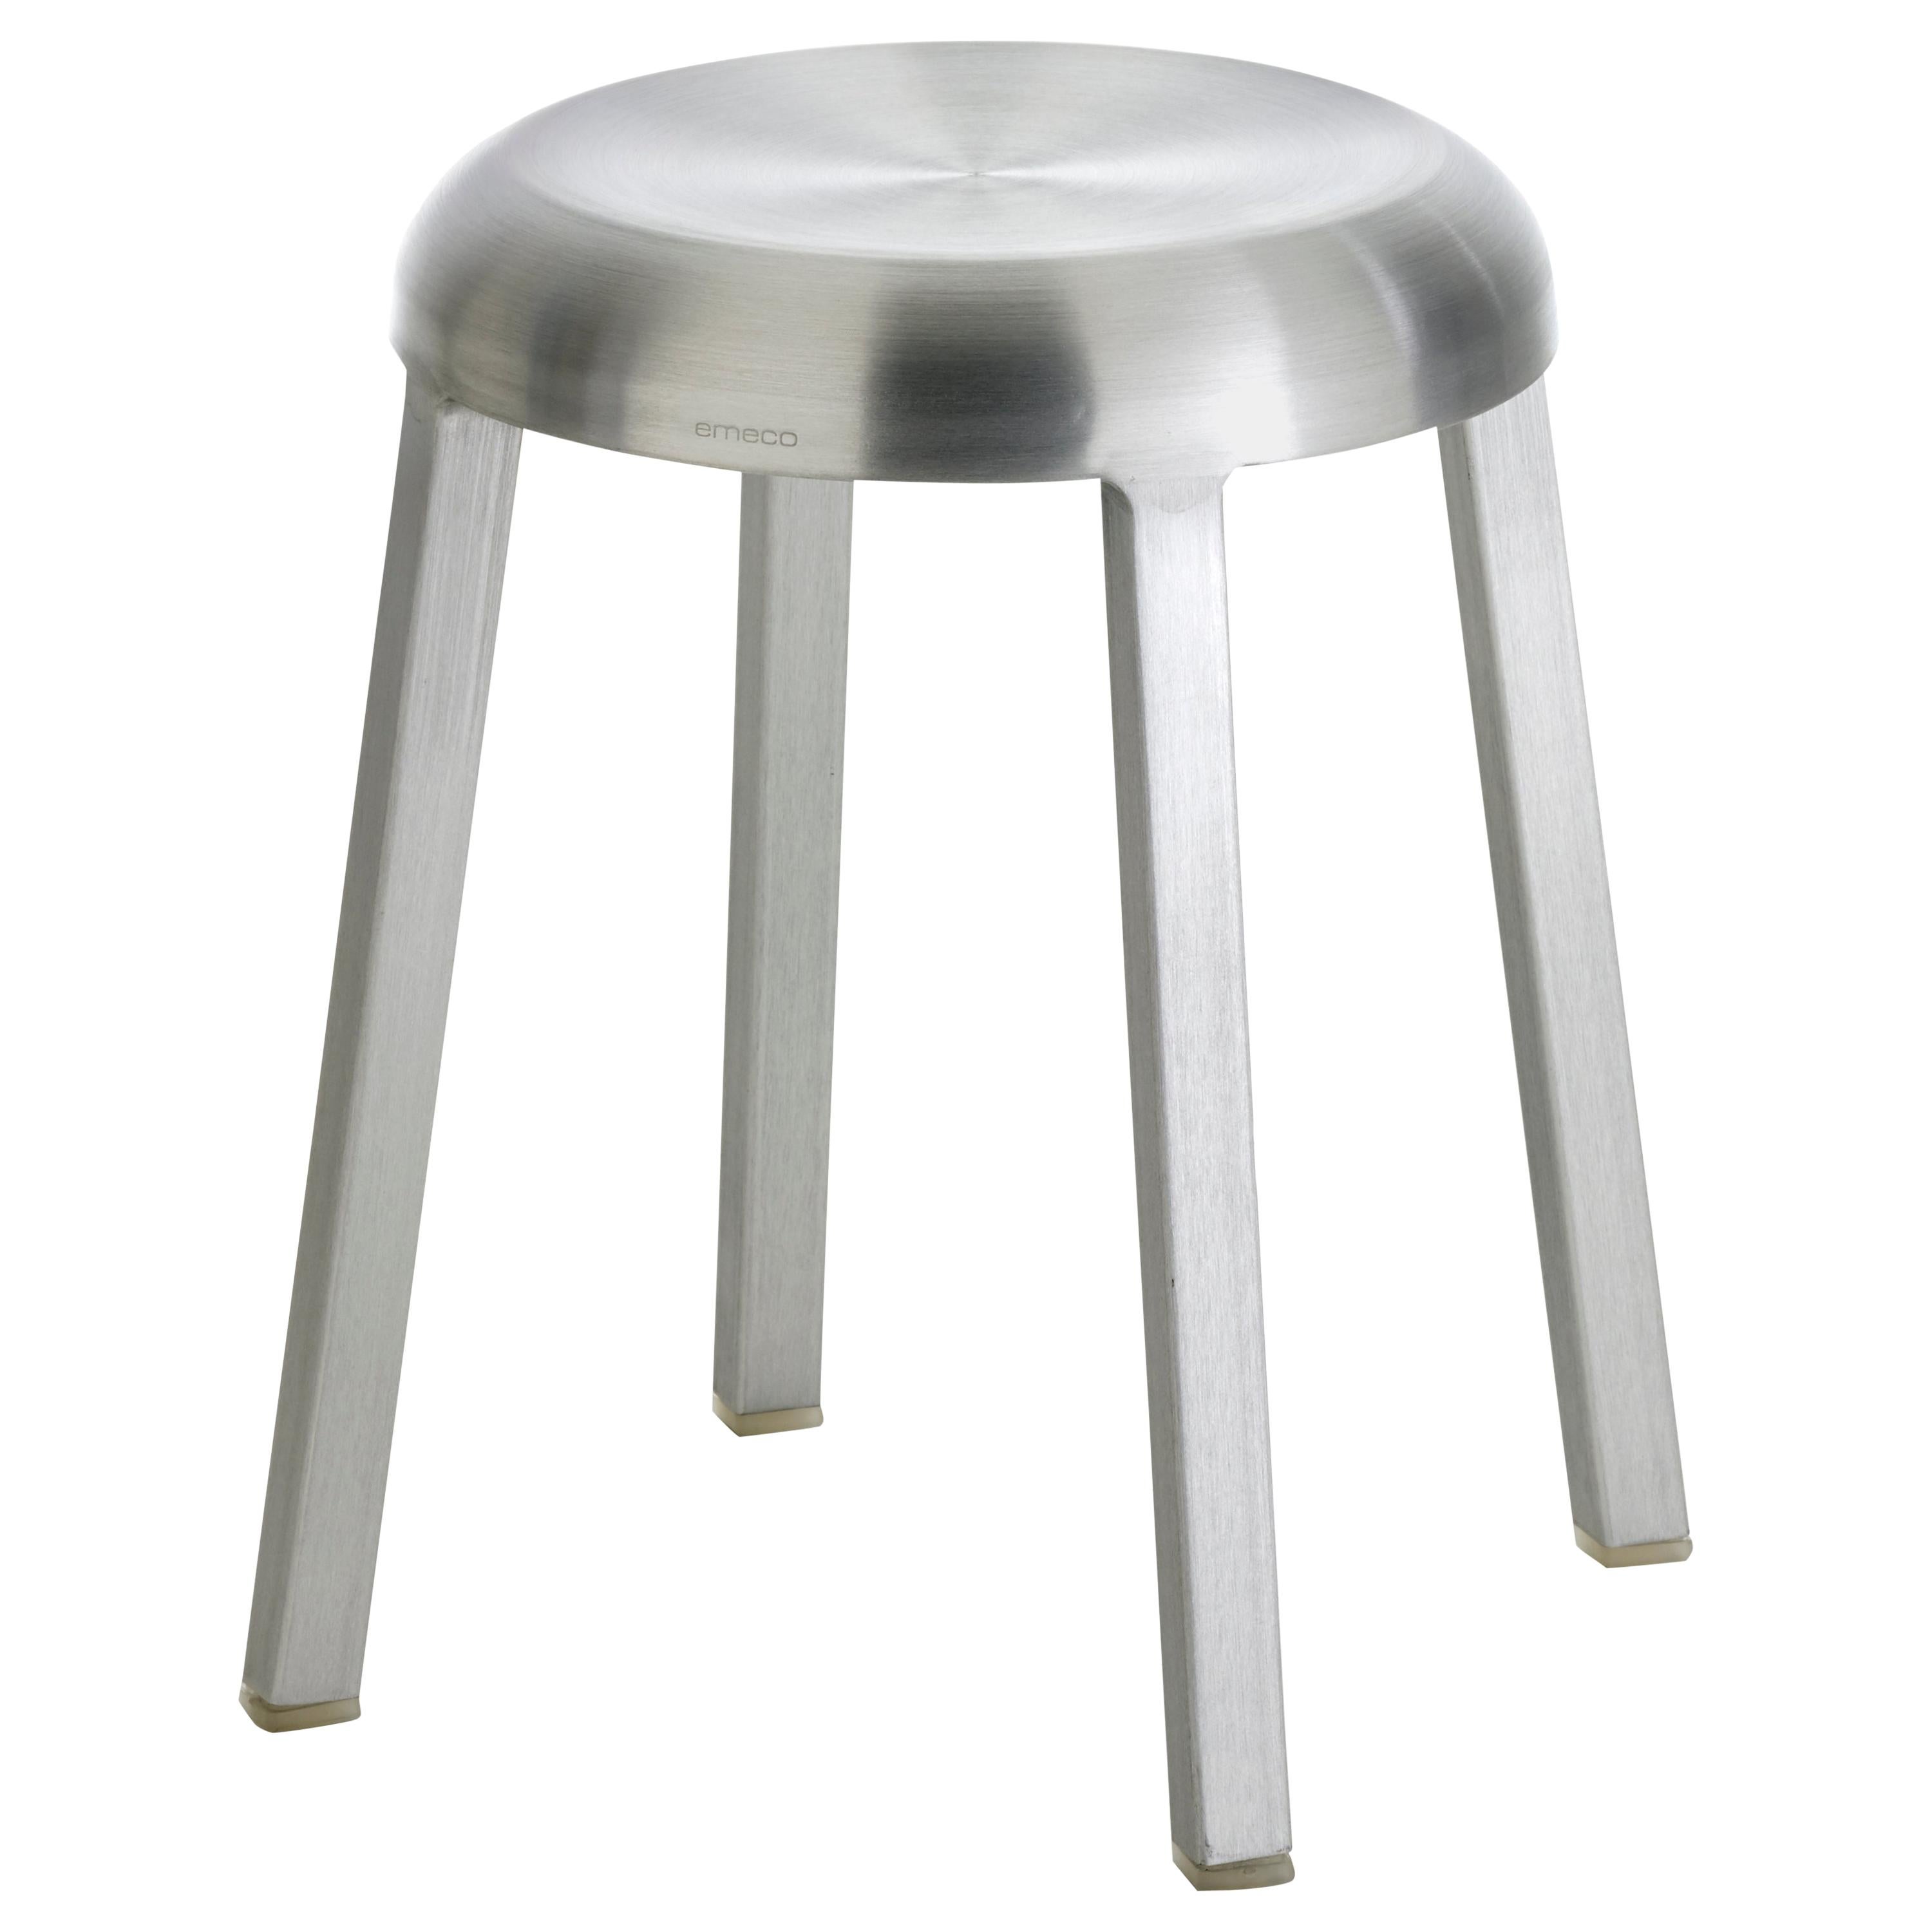 Emeco ZA Small Stool in Brushed Finish by Naoto Fukasawa For Sale